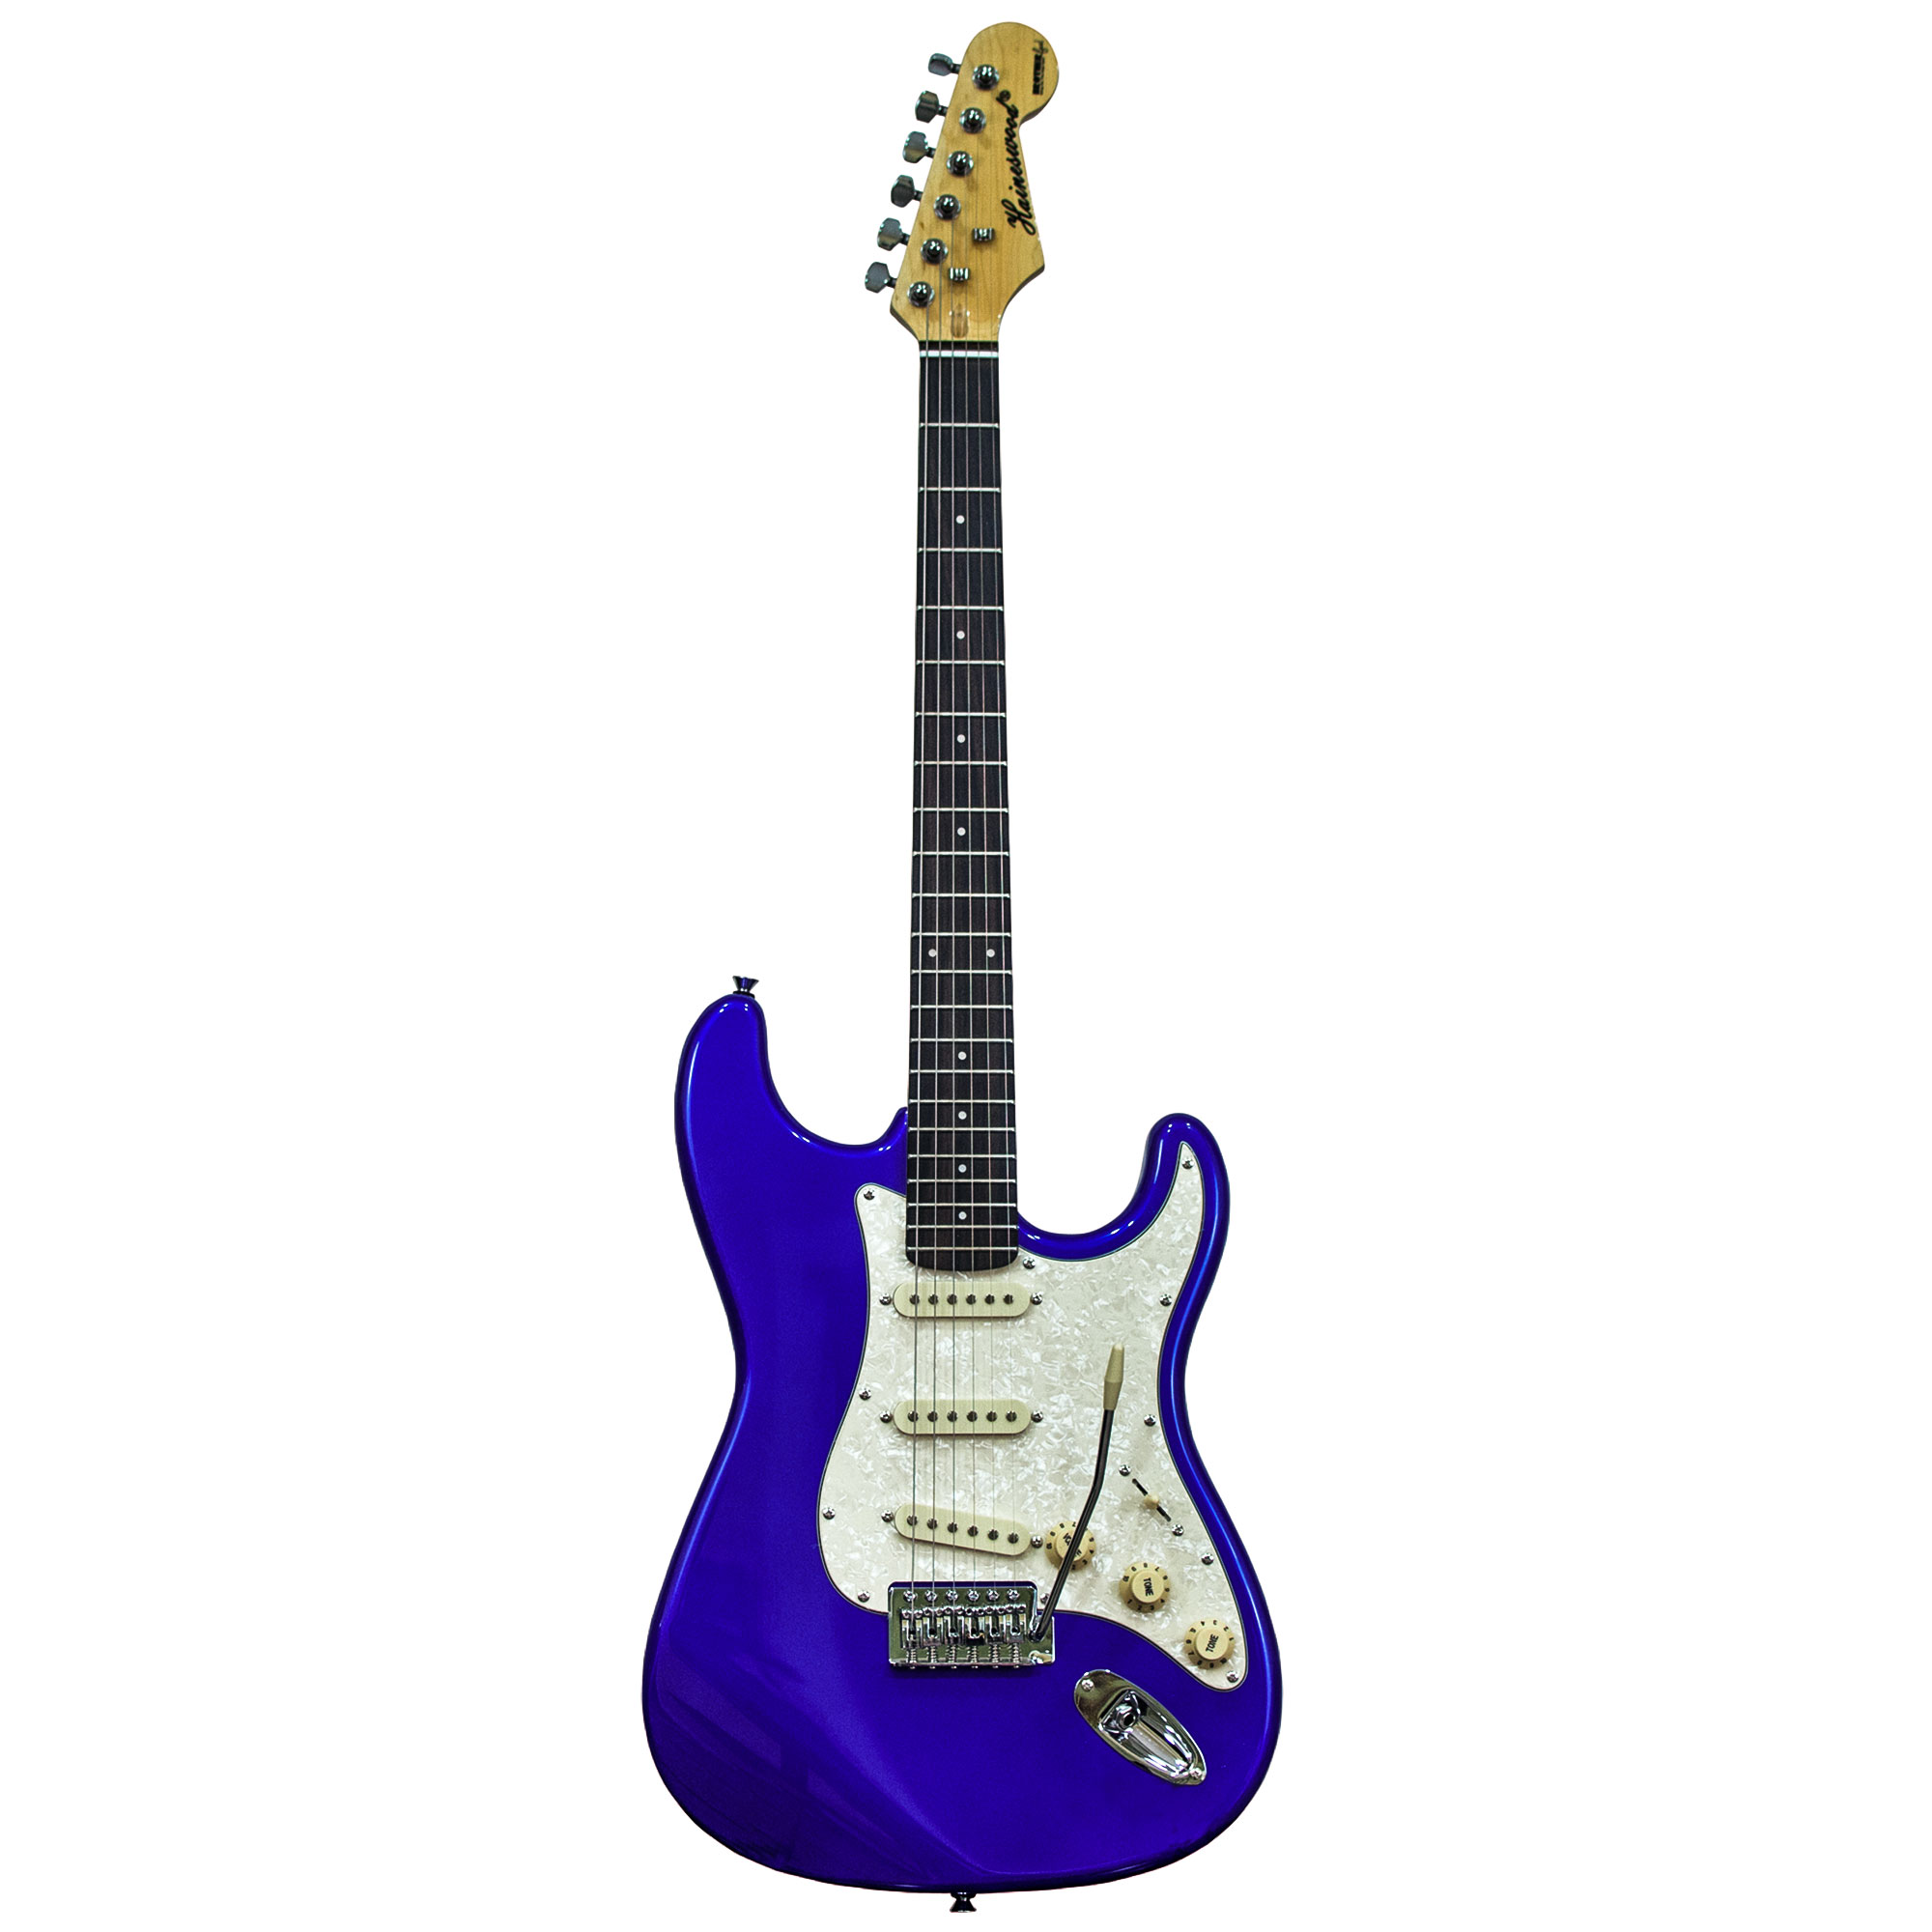 Haineswood Expedition Series ST-E-MBL Strat Electric Guitar (Blue)